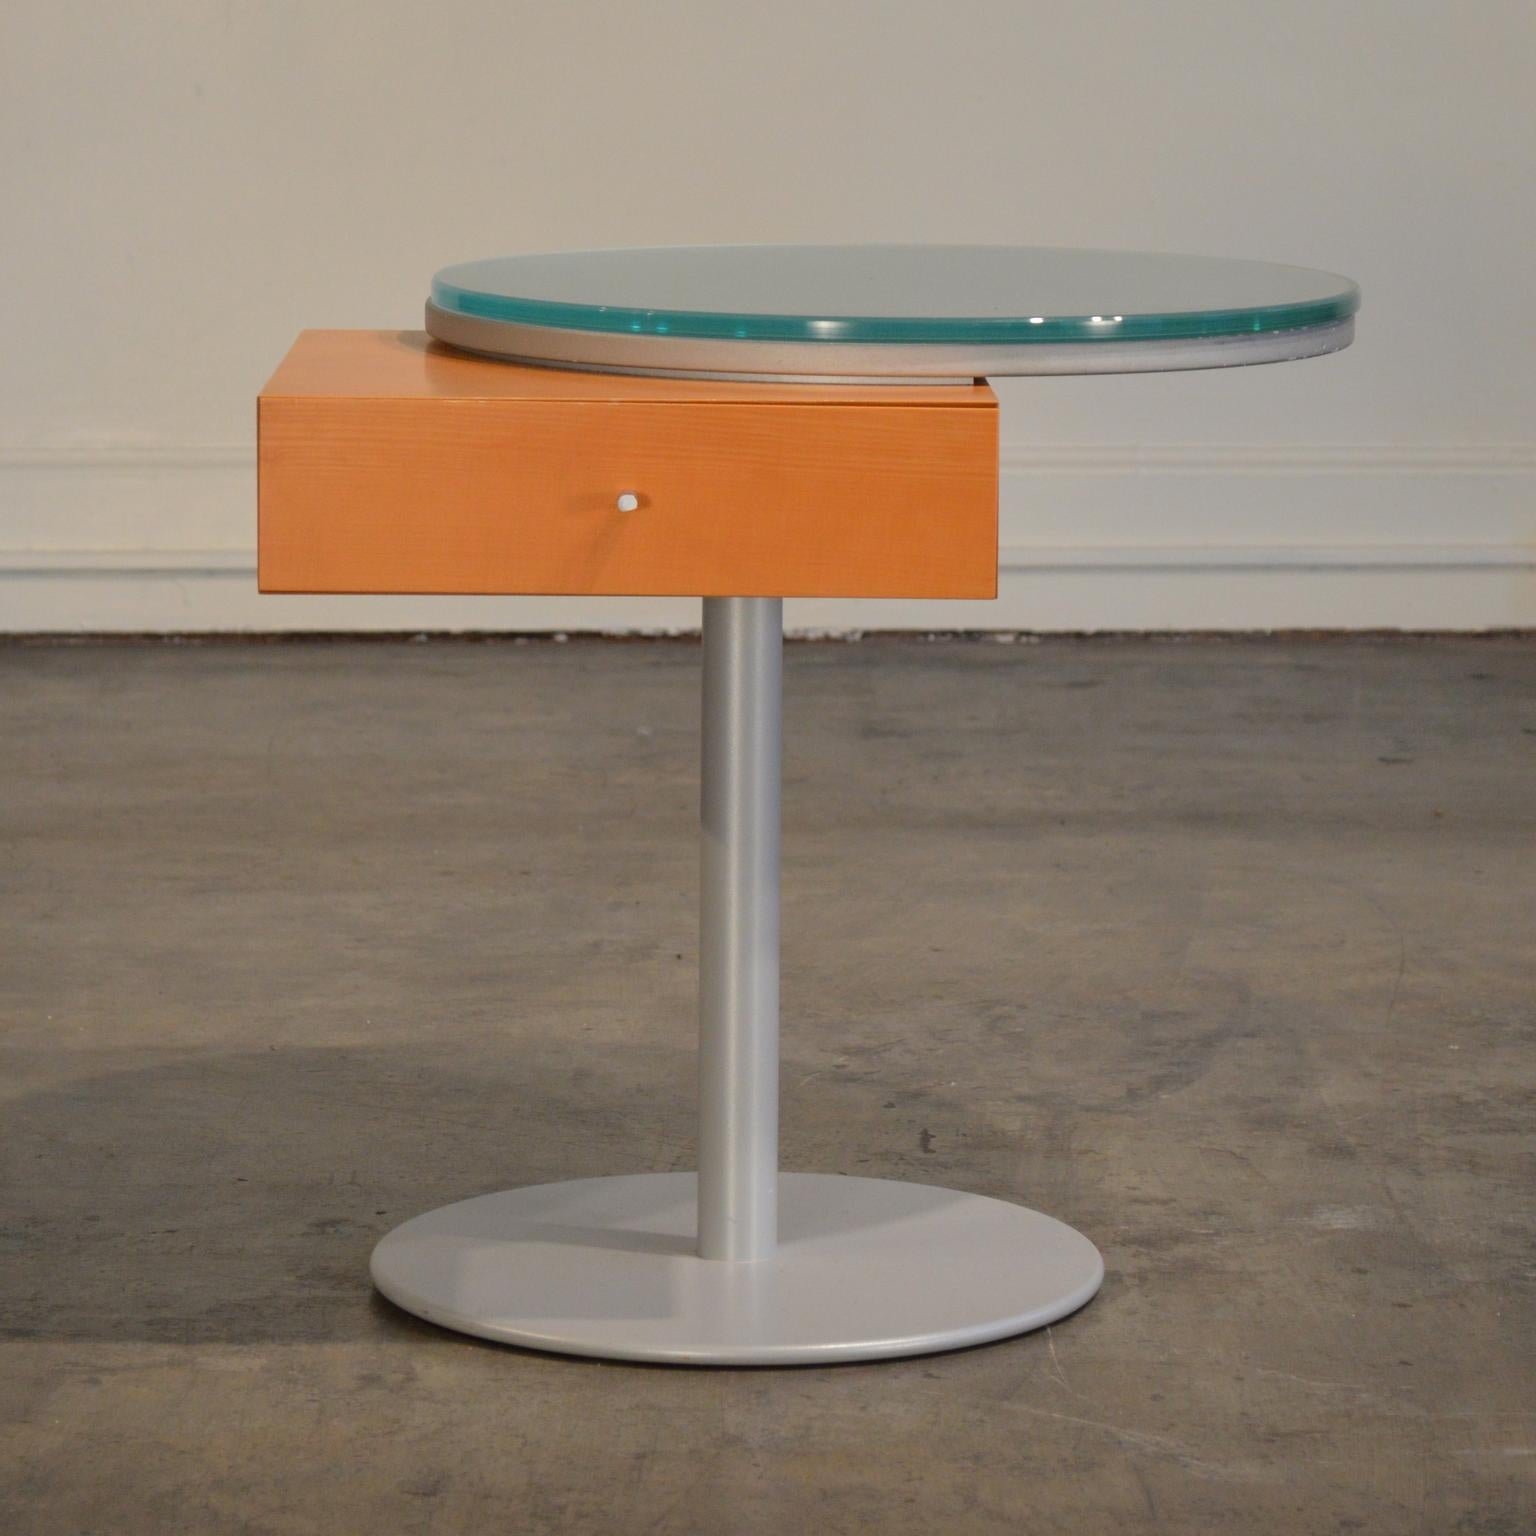 Side table with clear Memphis style - geometric shapes with a playfulness that extends Bauhaus forms with joyful humanism. A seamless box atop enameled steel base with asymmetrically mounted round tabletop with thick cast glass surface.

Heavy and